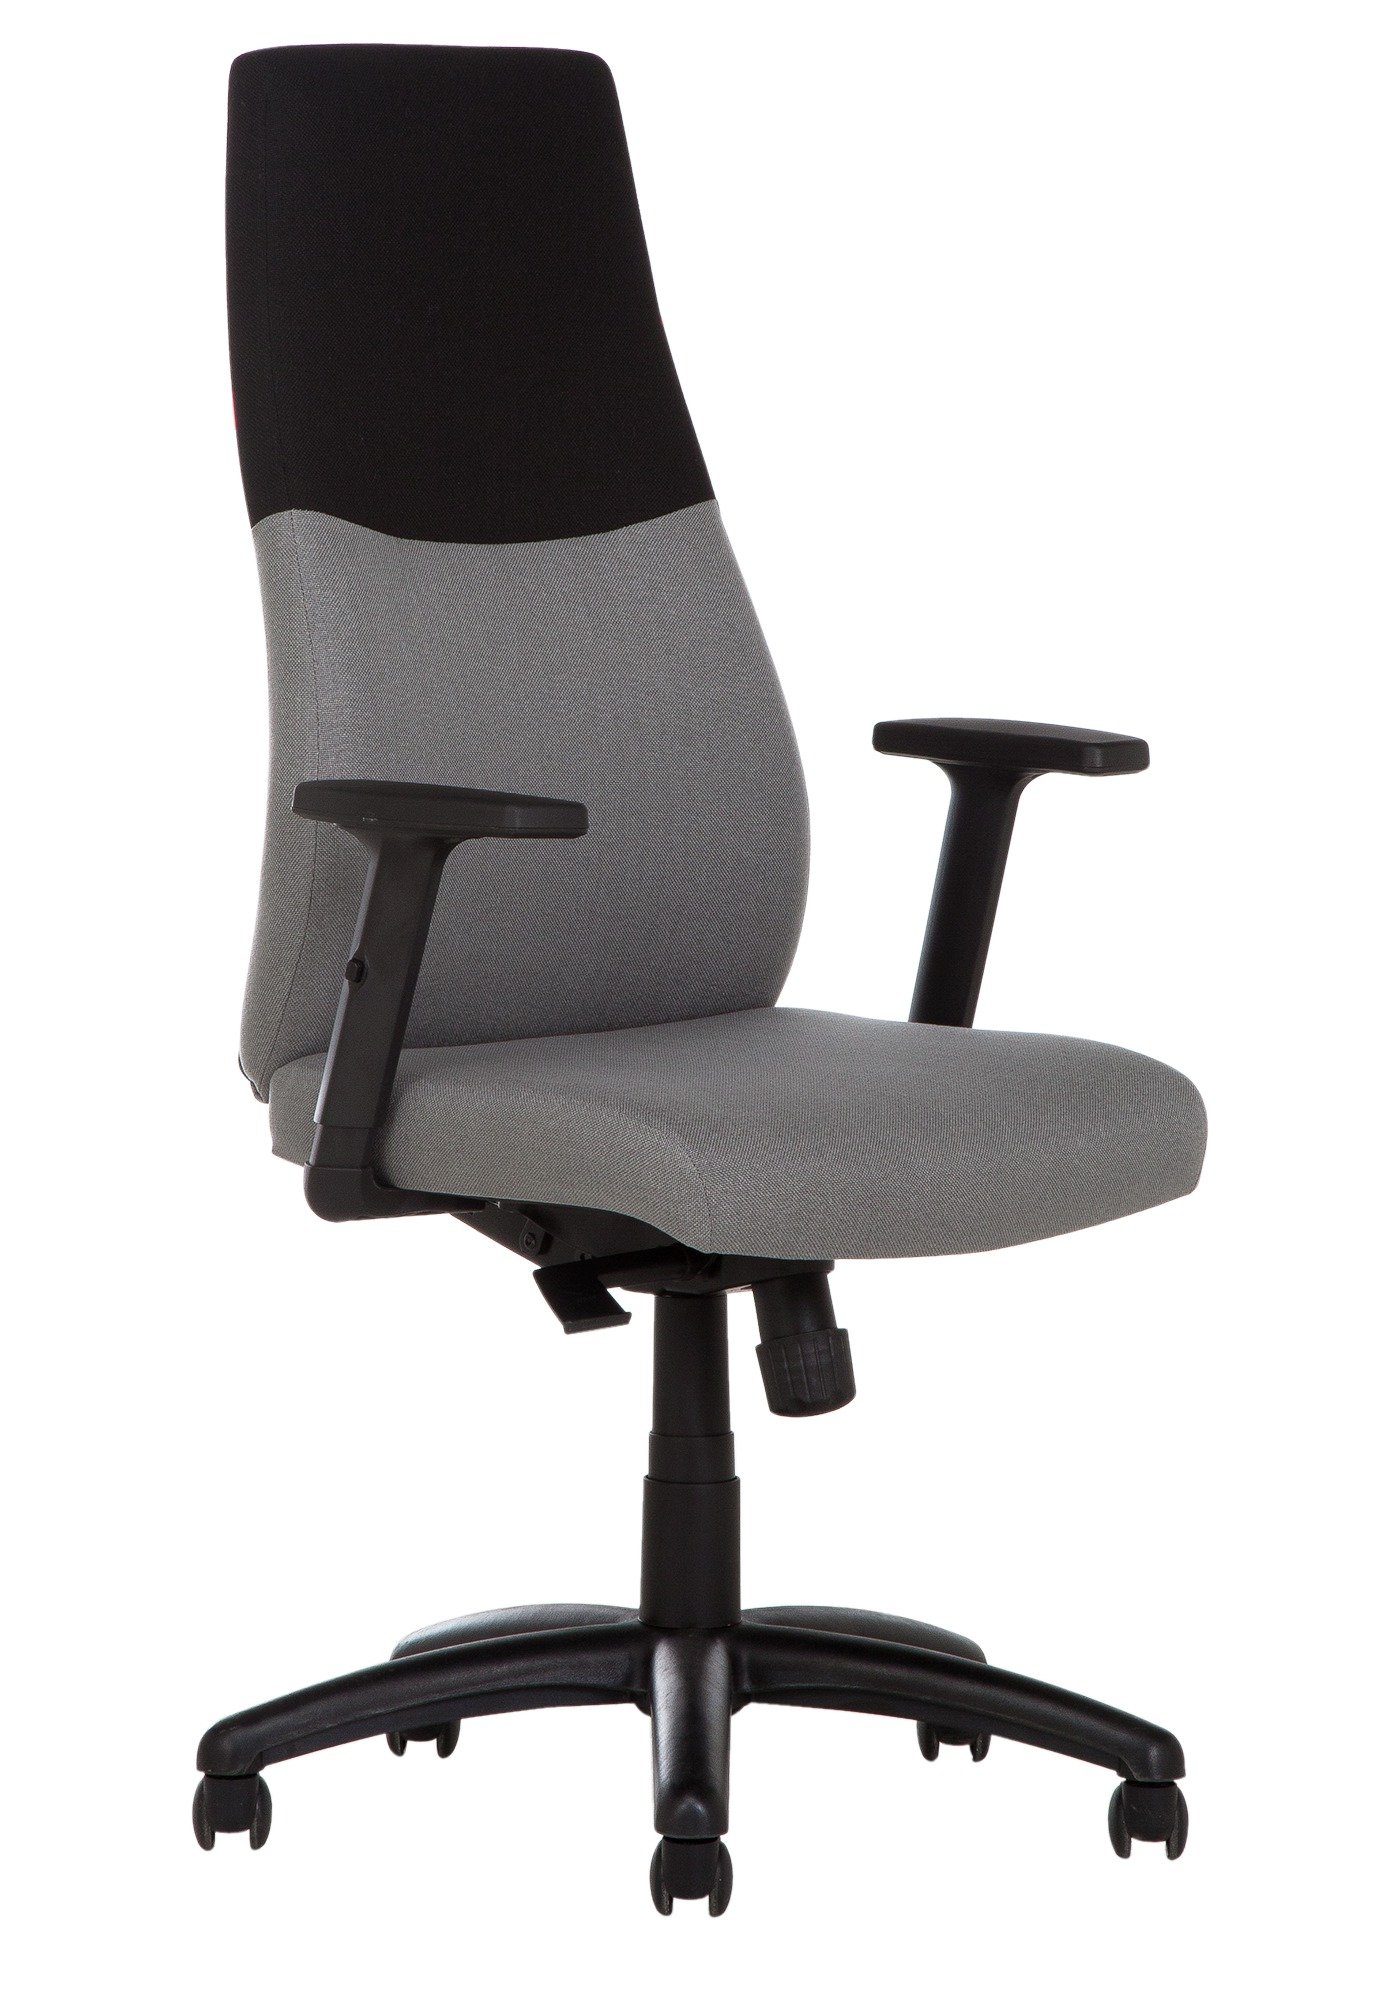 Hygena - Farrell Fabric Adjustable - Office Chair Review